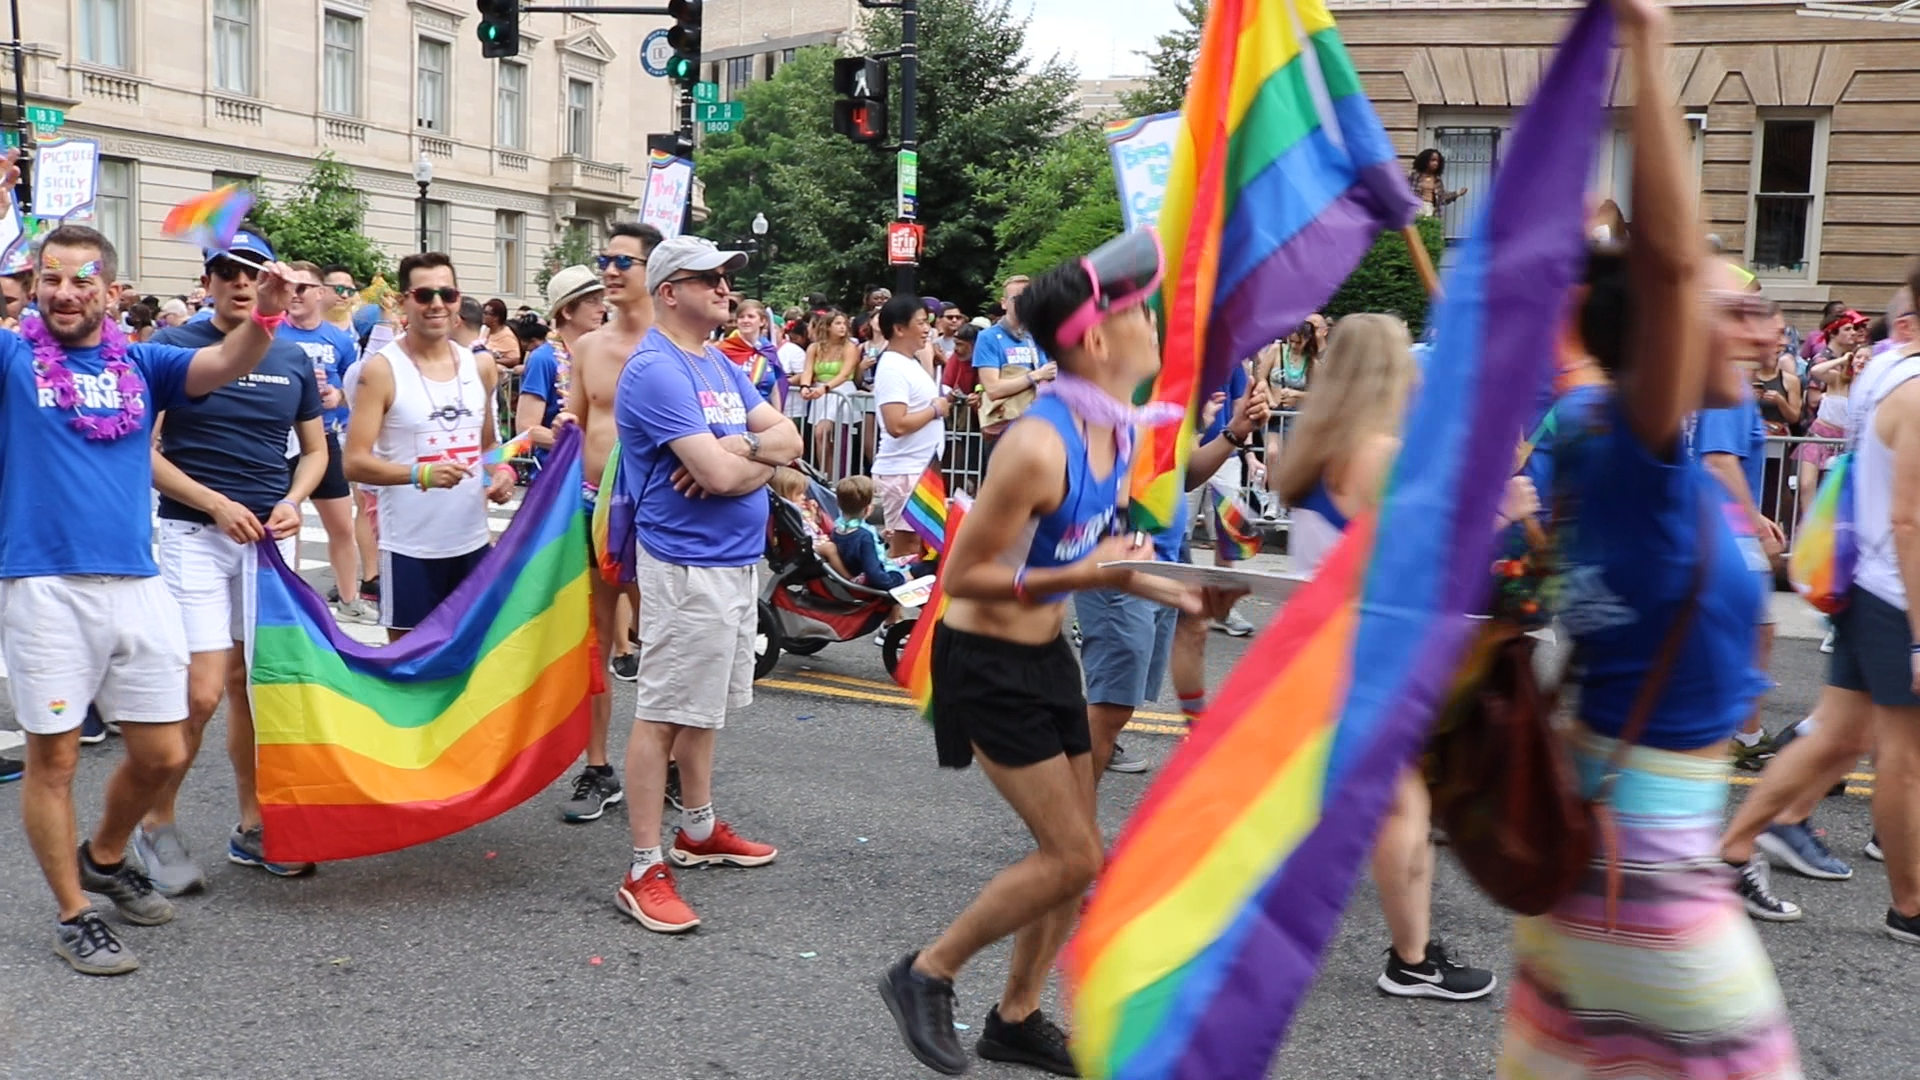 A group of people in a parade with rainbow flags.